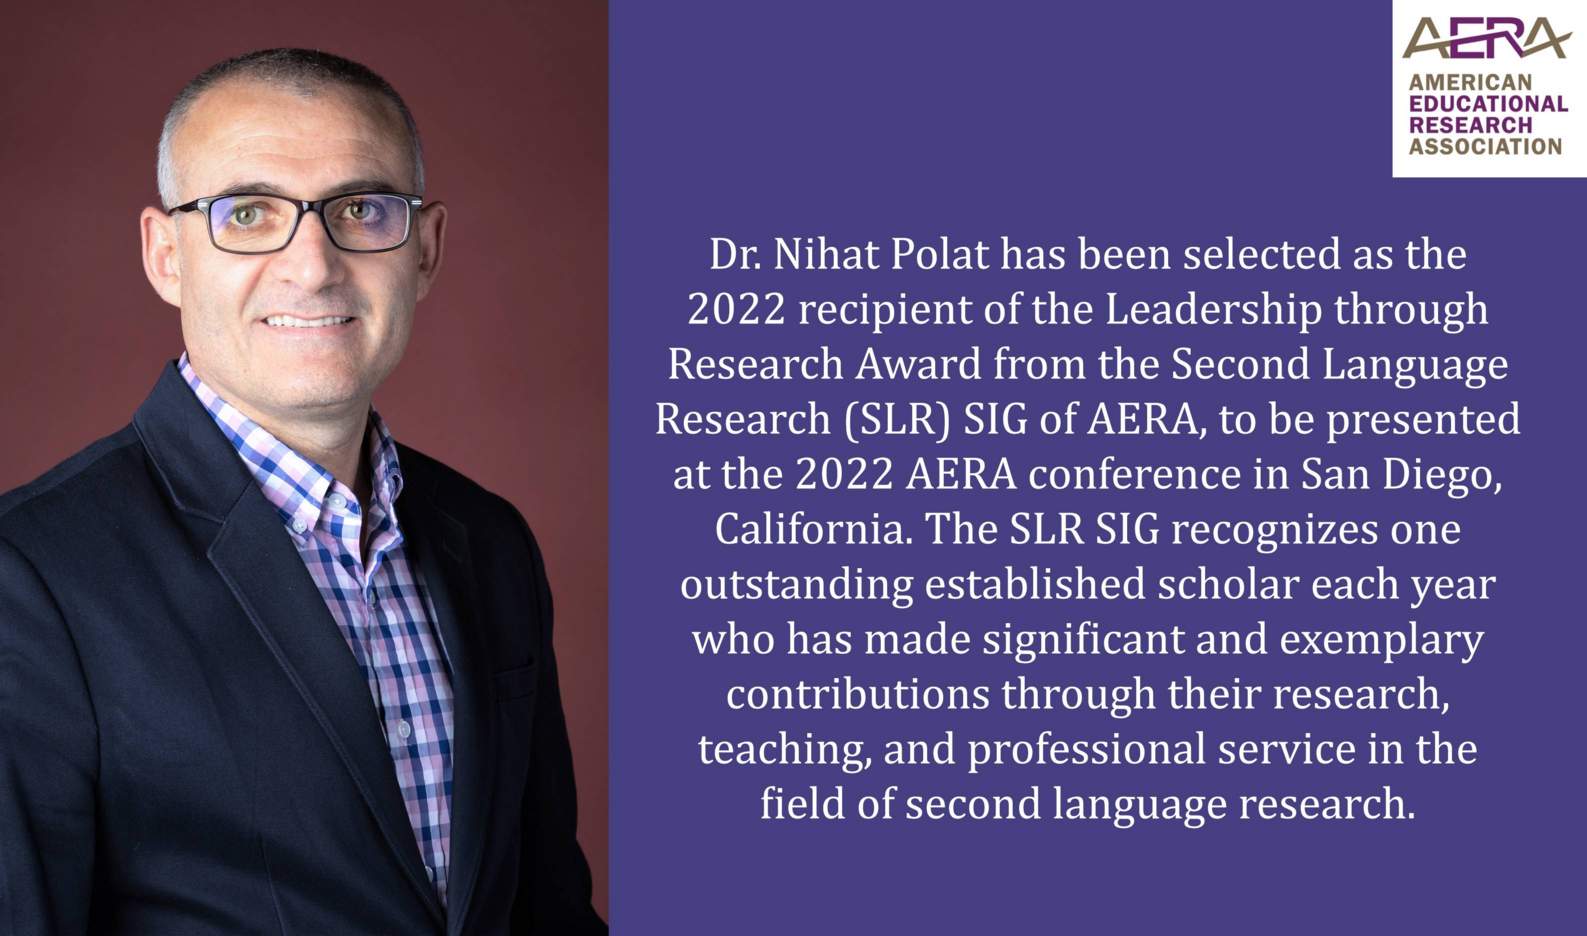 Dr. Nihat Polat has been selected as the 2022 recipient of the Leadership through Research Award from the Second Language Research (SLR) SIG of AERA, to be presented at the 2022 AERA conference